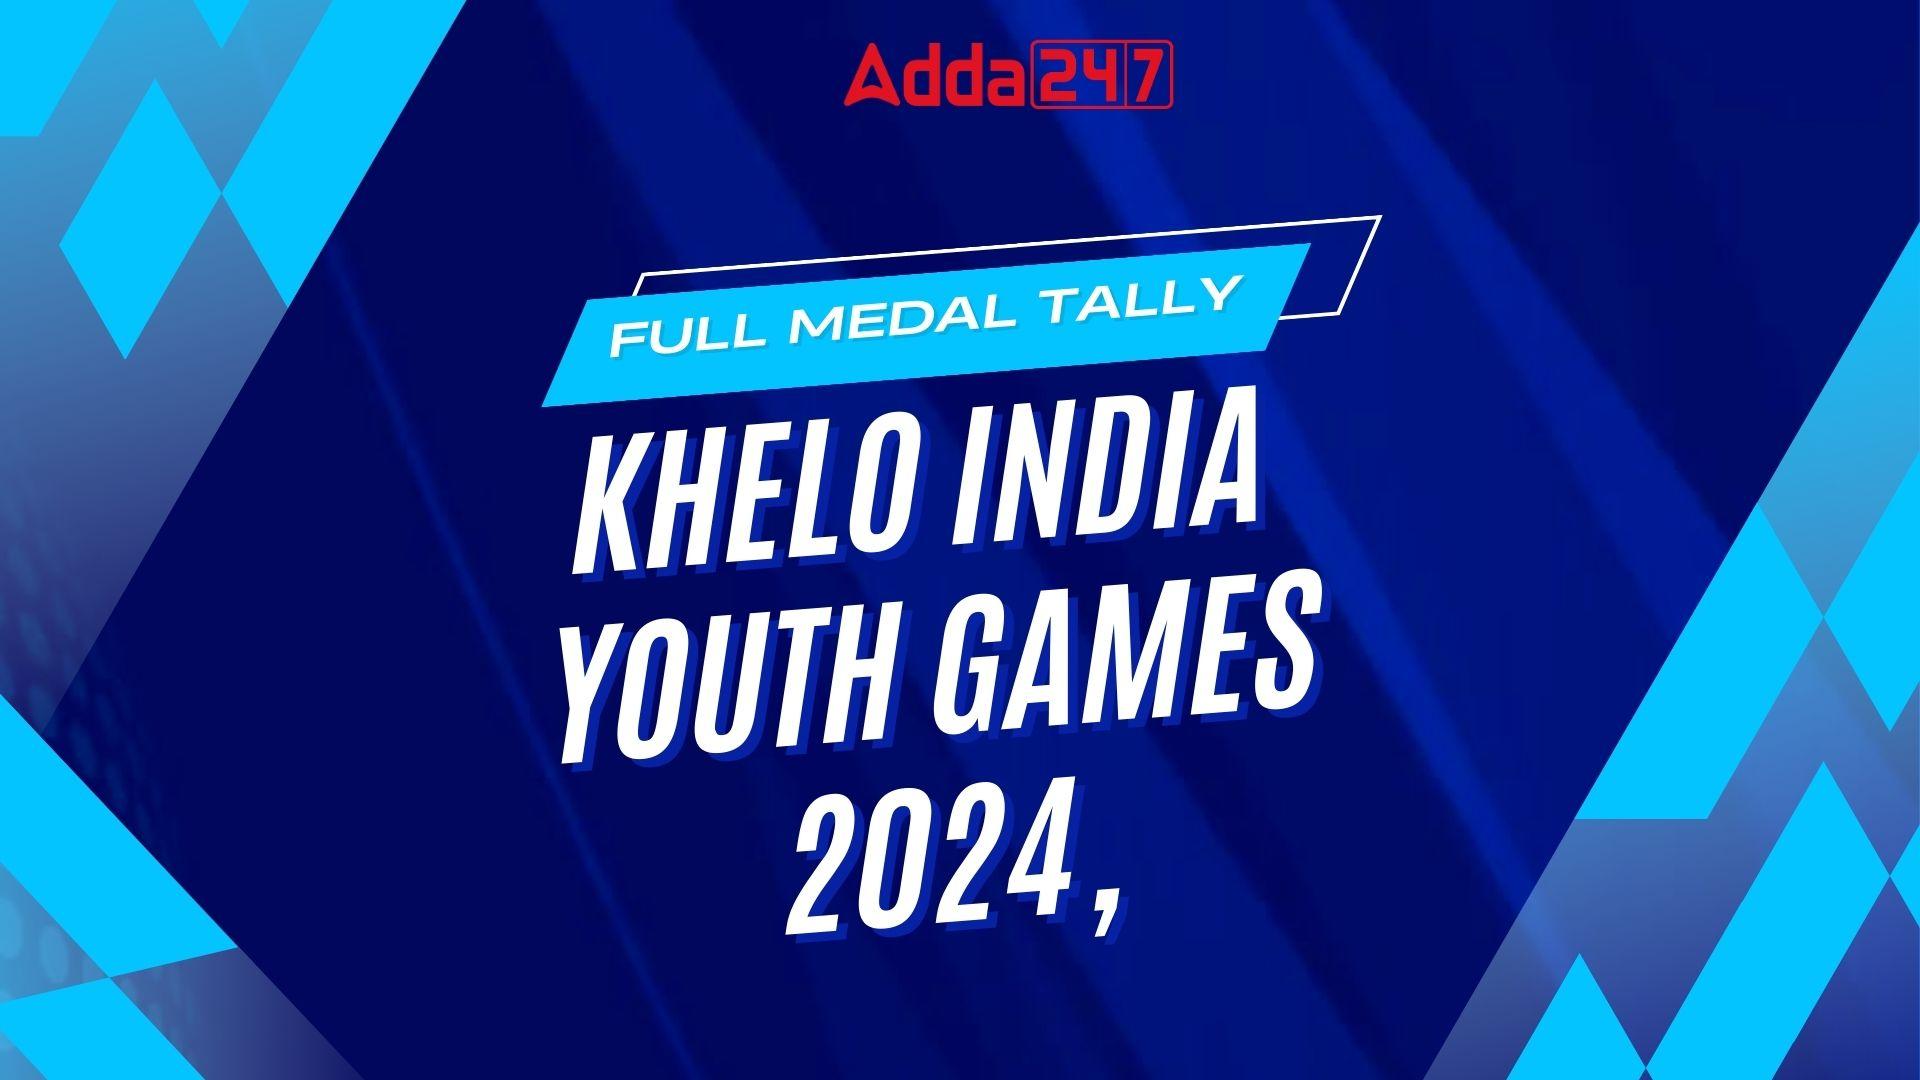 Khelo India Youth Games 2024, Full Medal Tally